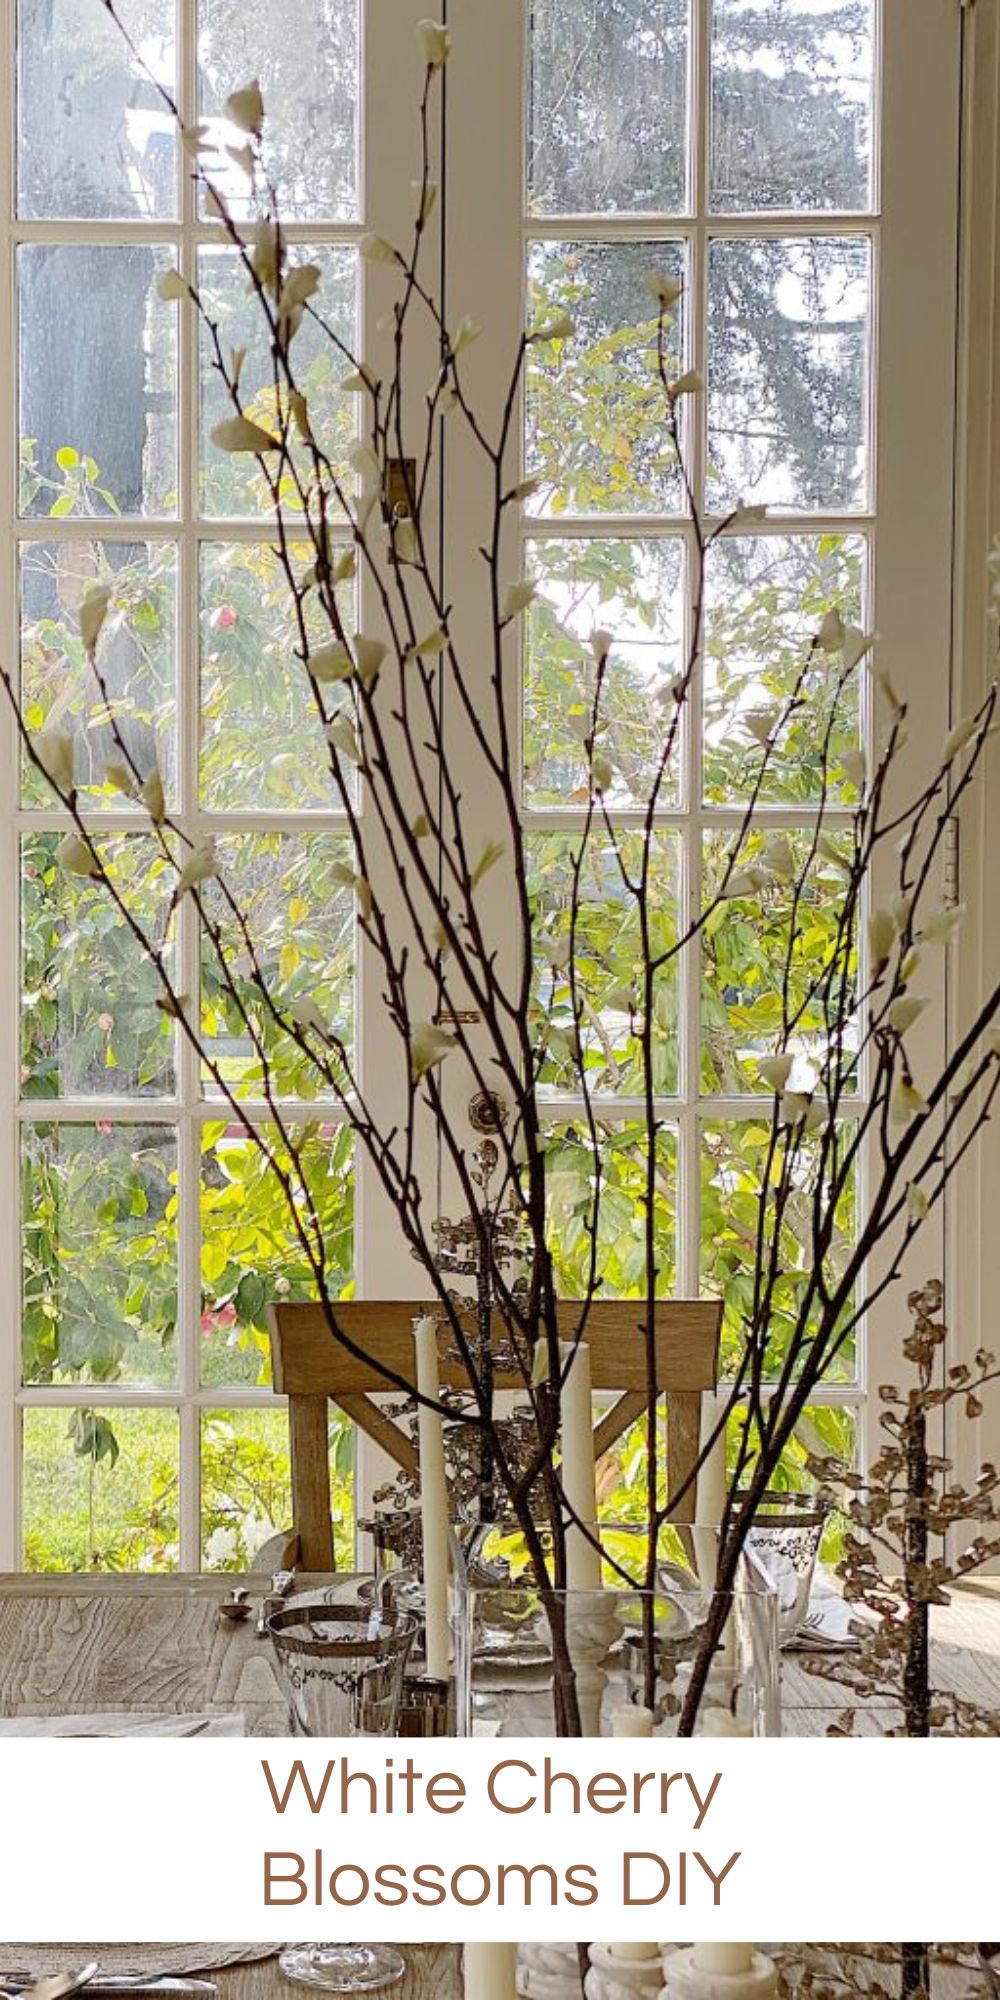 My white cherry blossom stems cost one-third the price of the Pottery Barn ones that inspired me and these will last you forever.